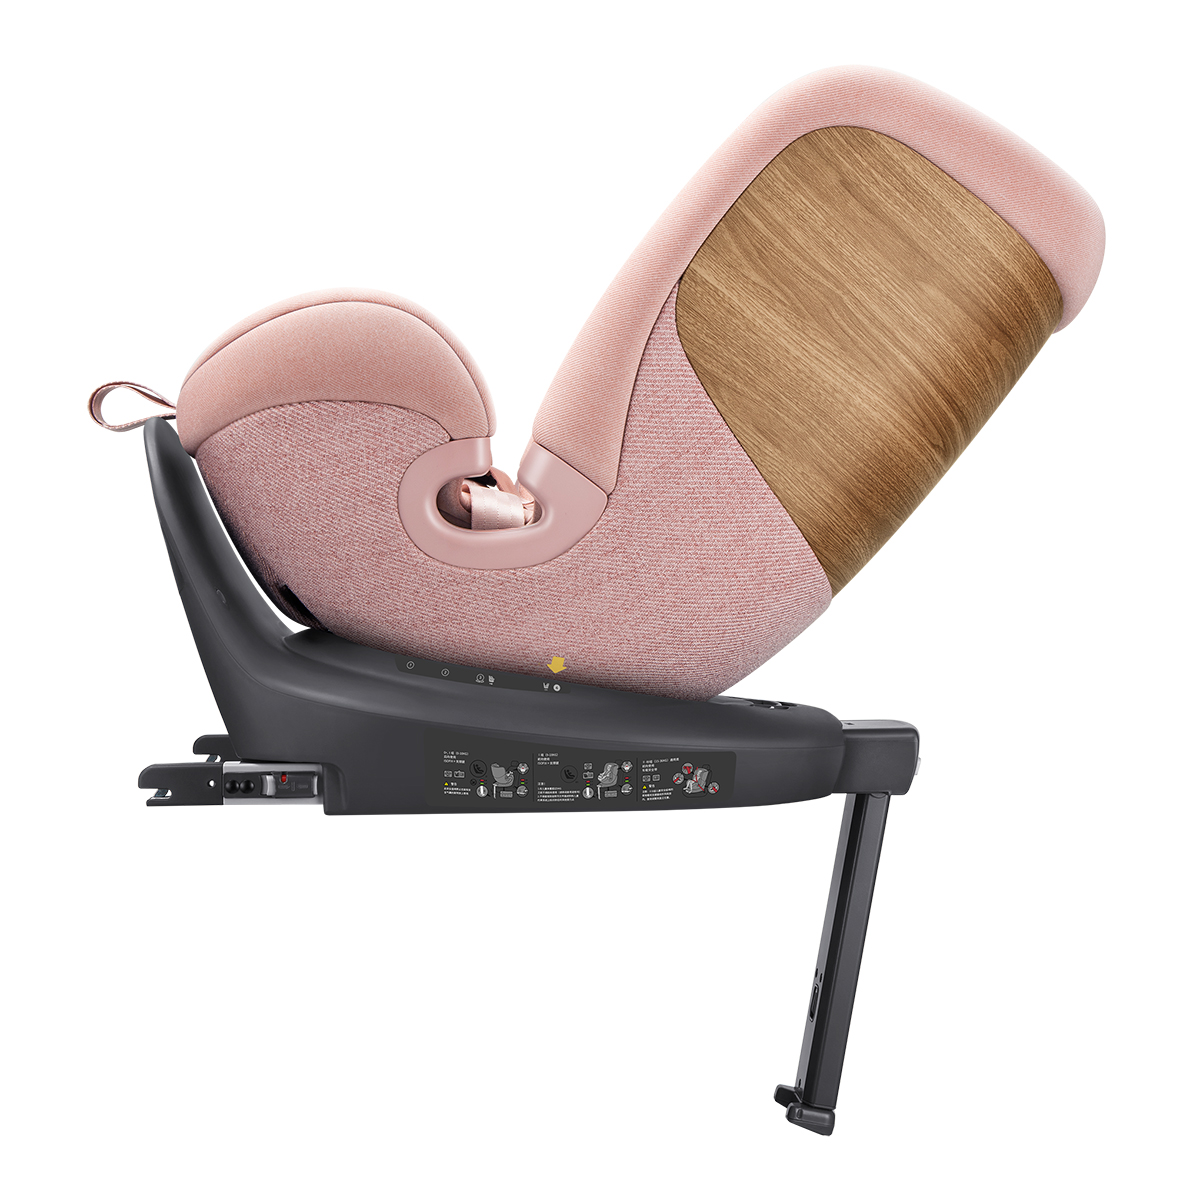 YKO - Maple&Co Child Car Seat - Pink